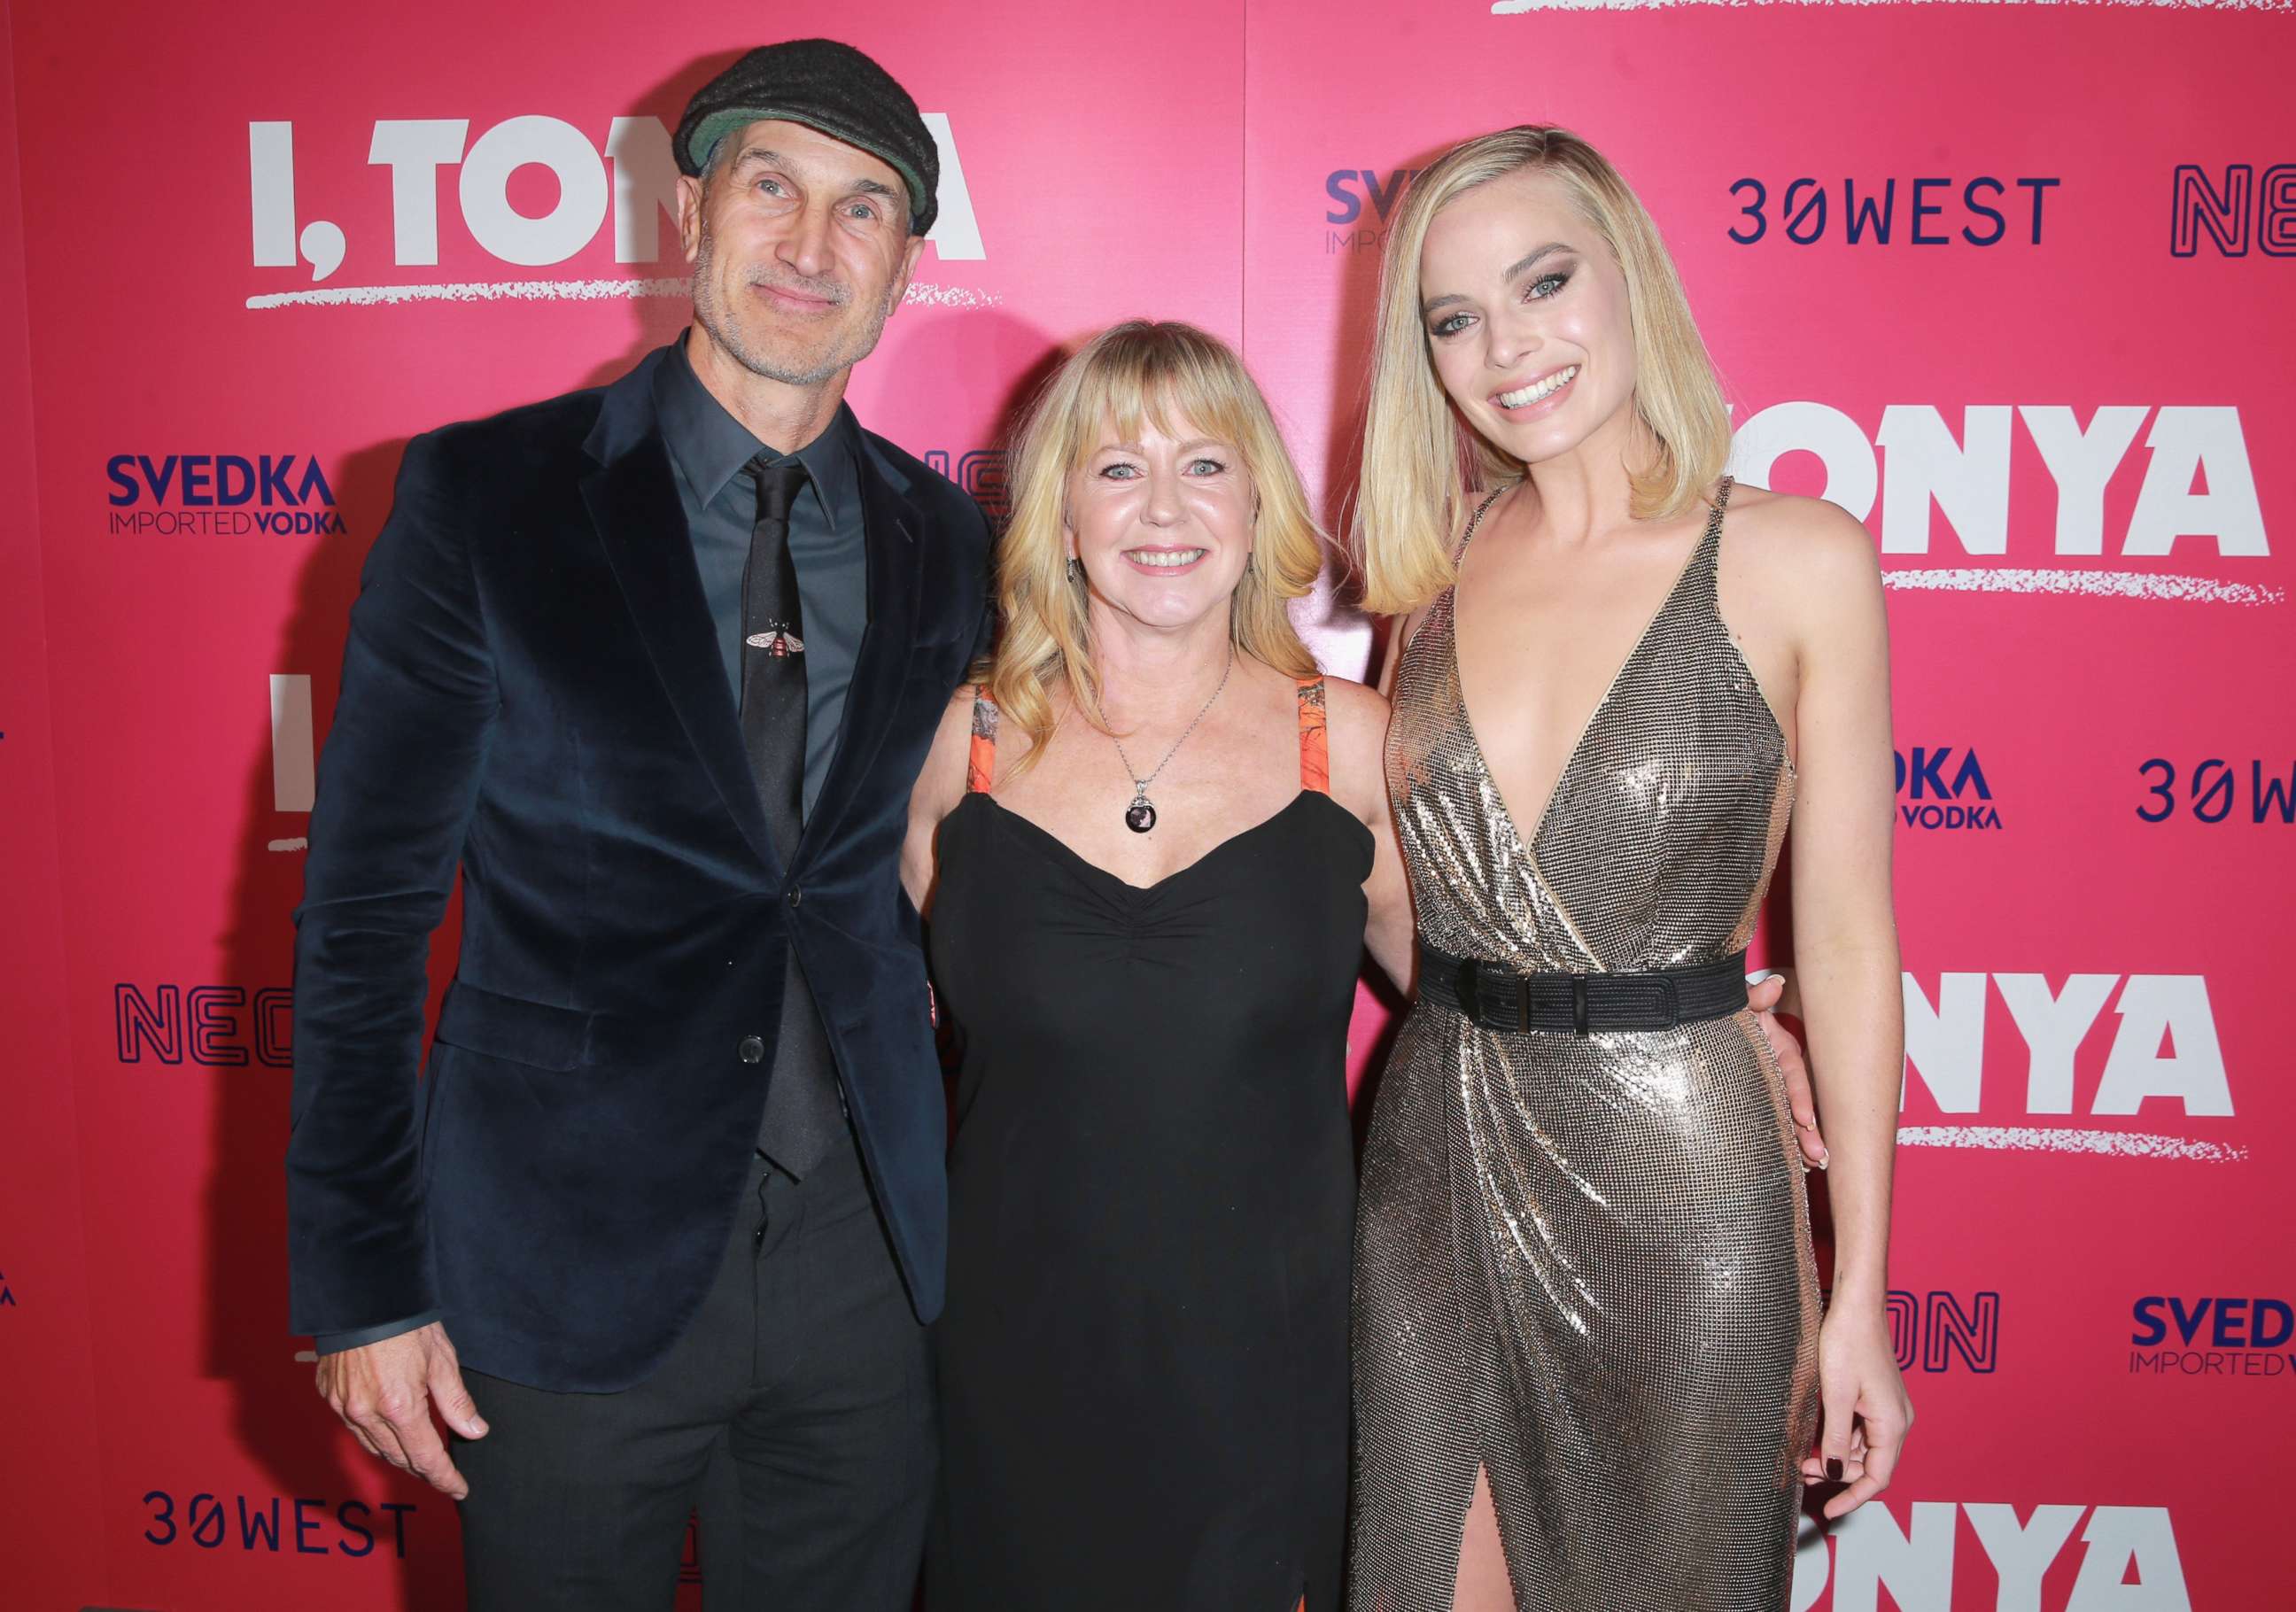 PHOTO: Craig Gillespie, Tonya Harding and Margot Robbie attend Premiere Of Neon's "I, Tonya" at the Egyptian Theatre, Dec. 5, 2017, in Hollywood, Calif.